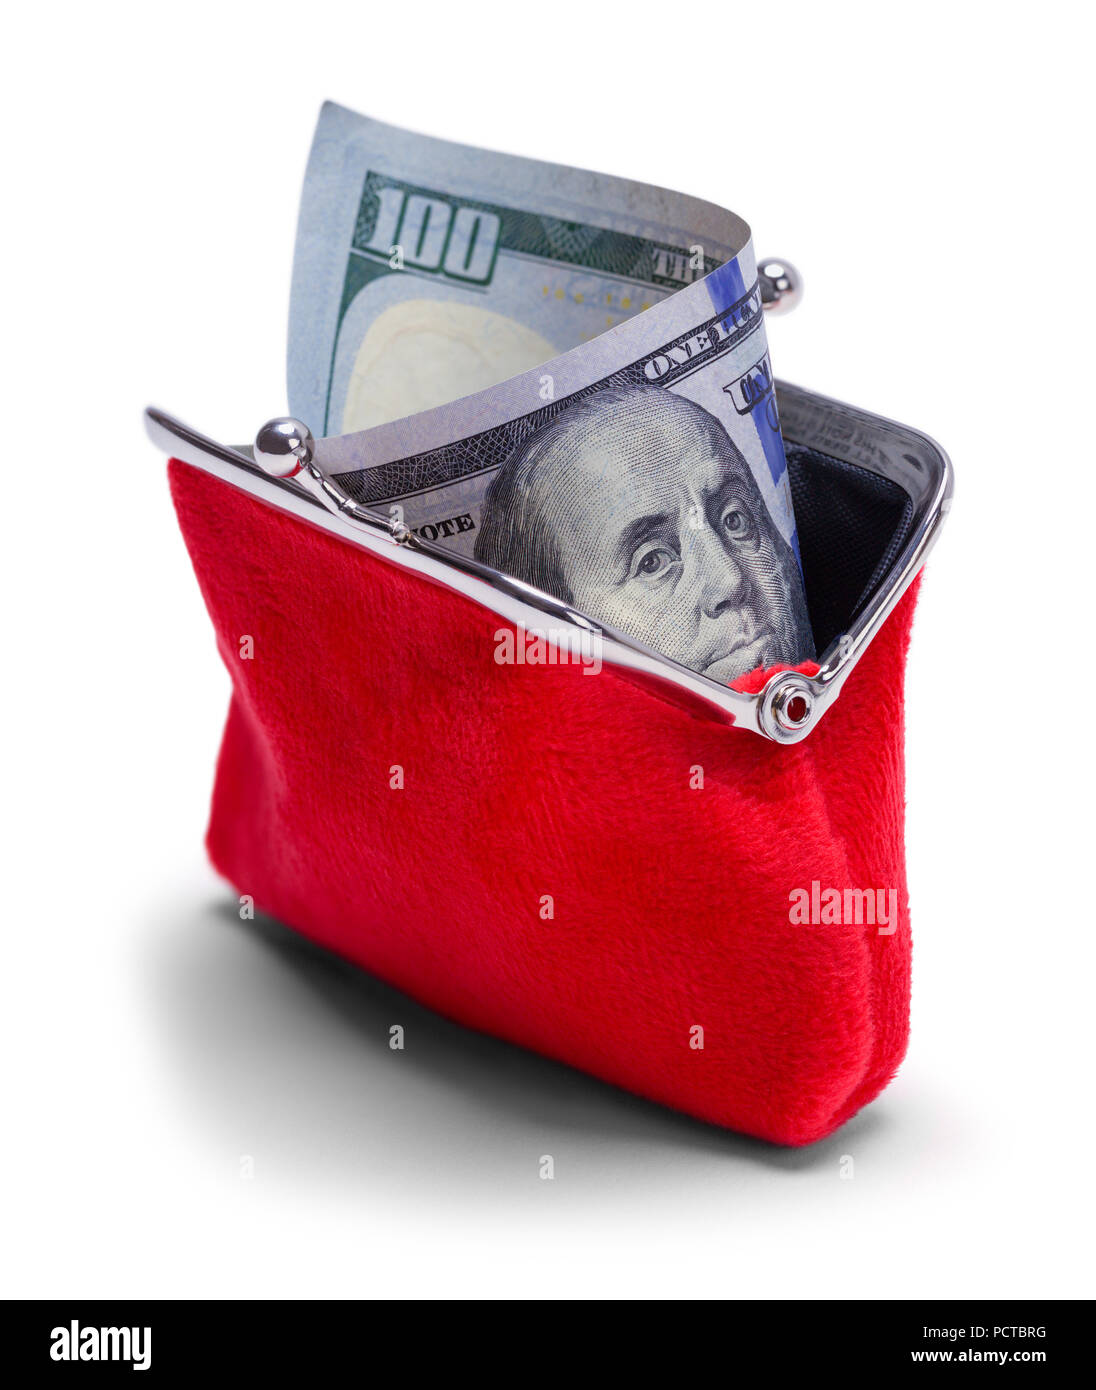 Open Change Purse With Hundred Dollar Bill Isolated on White. Stock Photo